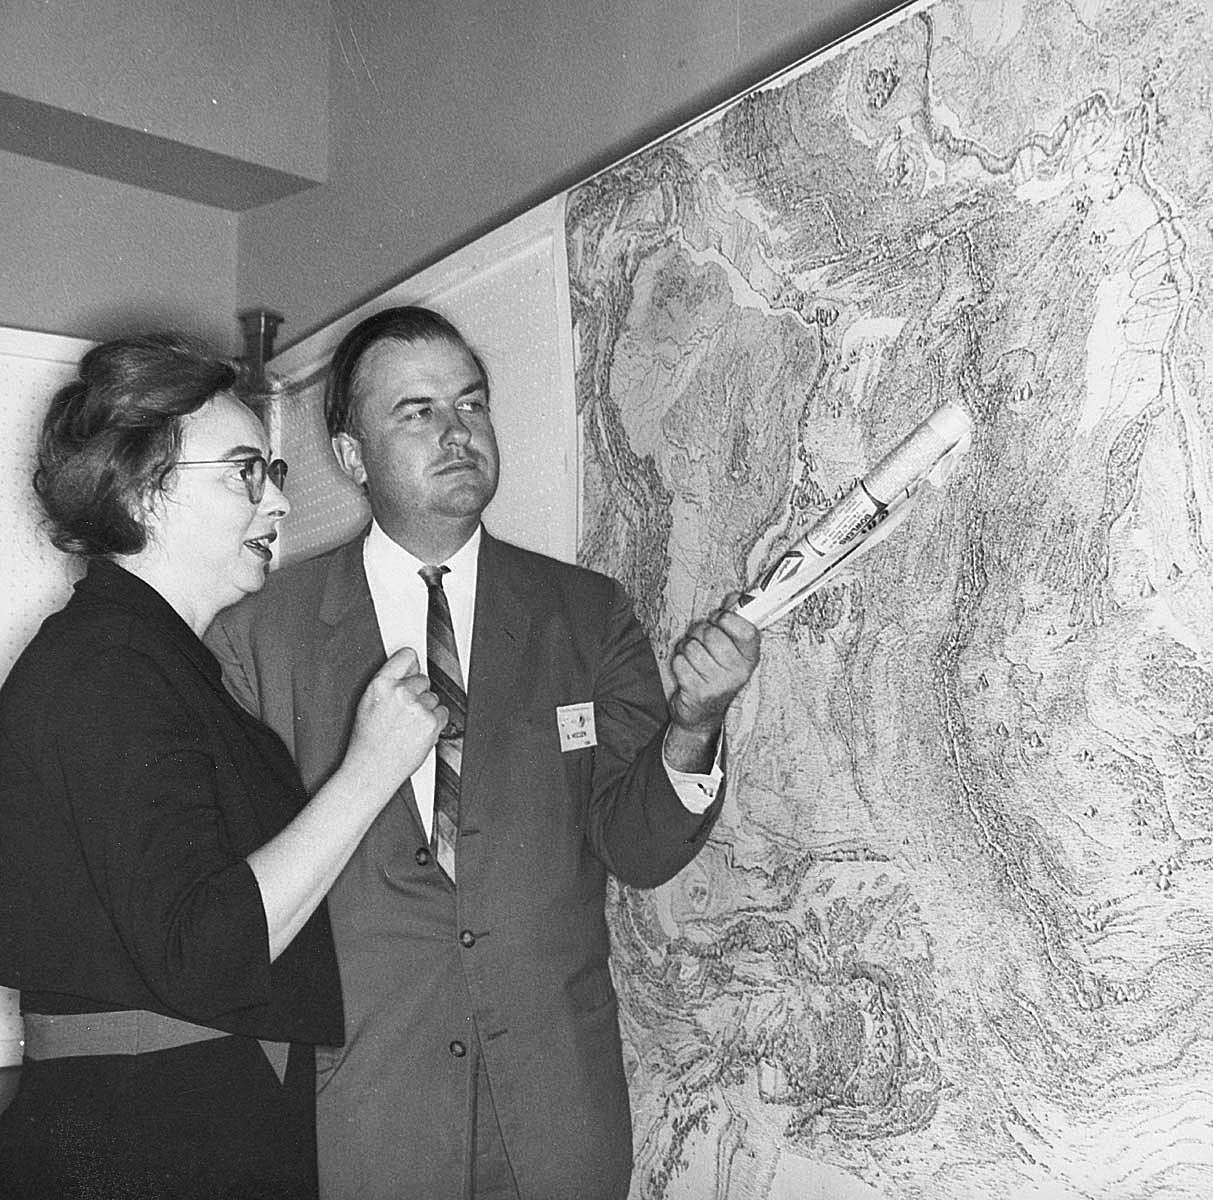 Black and white photograph of Marie Tharp and Bruce Heezen looking at a map together